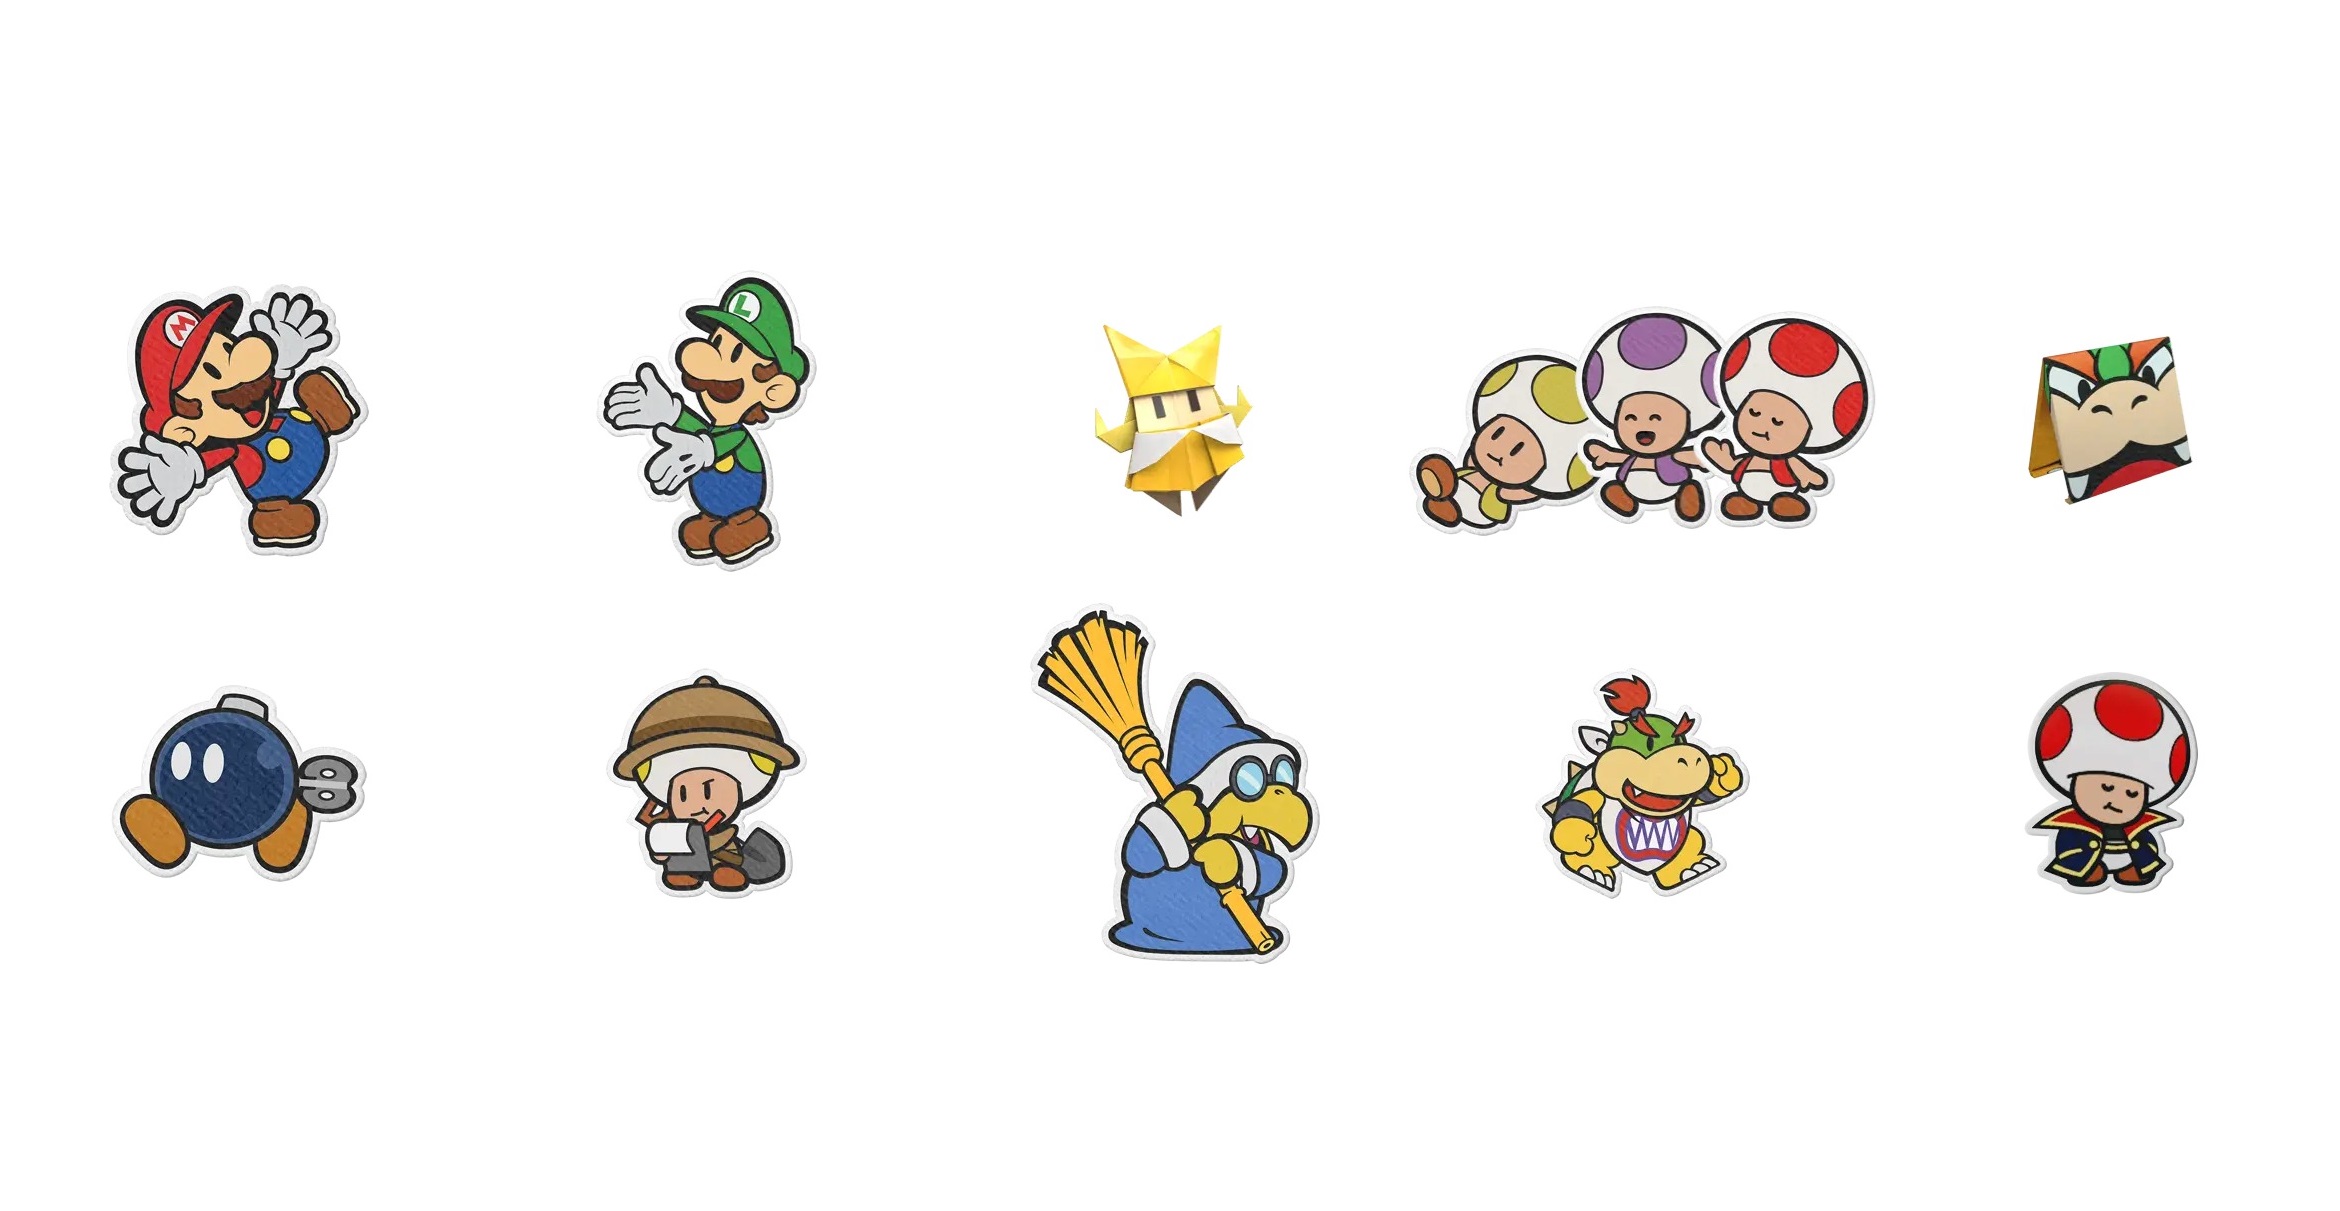 Paper Mario The Origami King details characters, locations and bosses